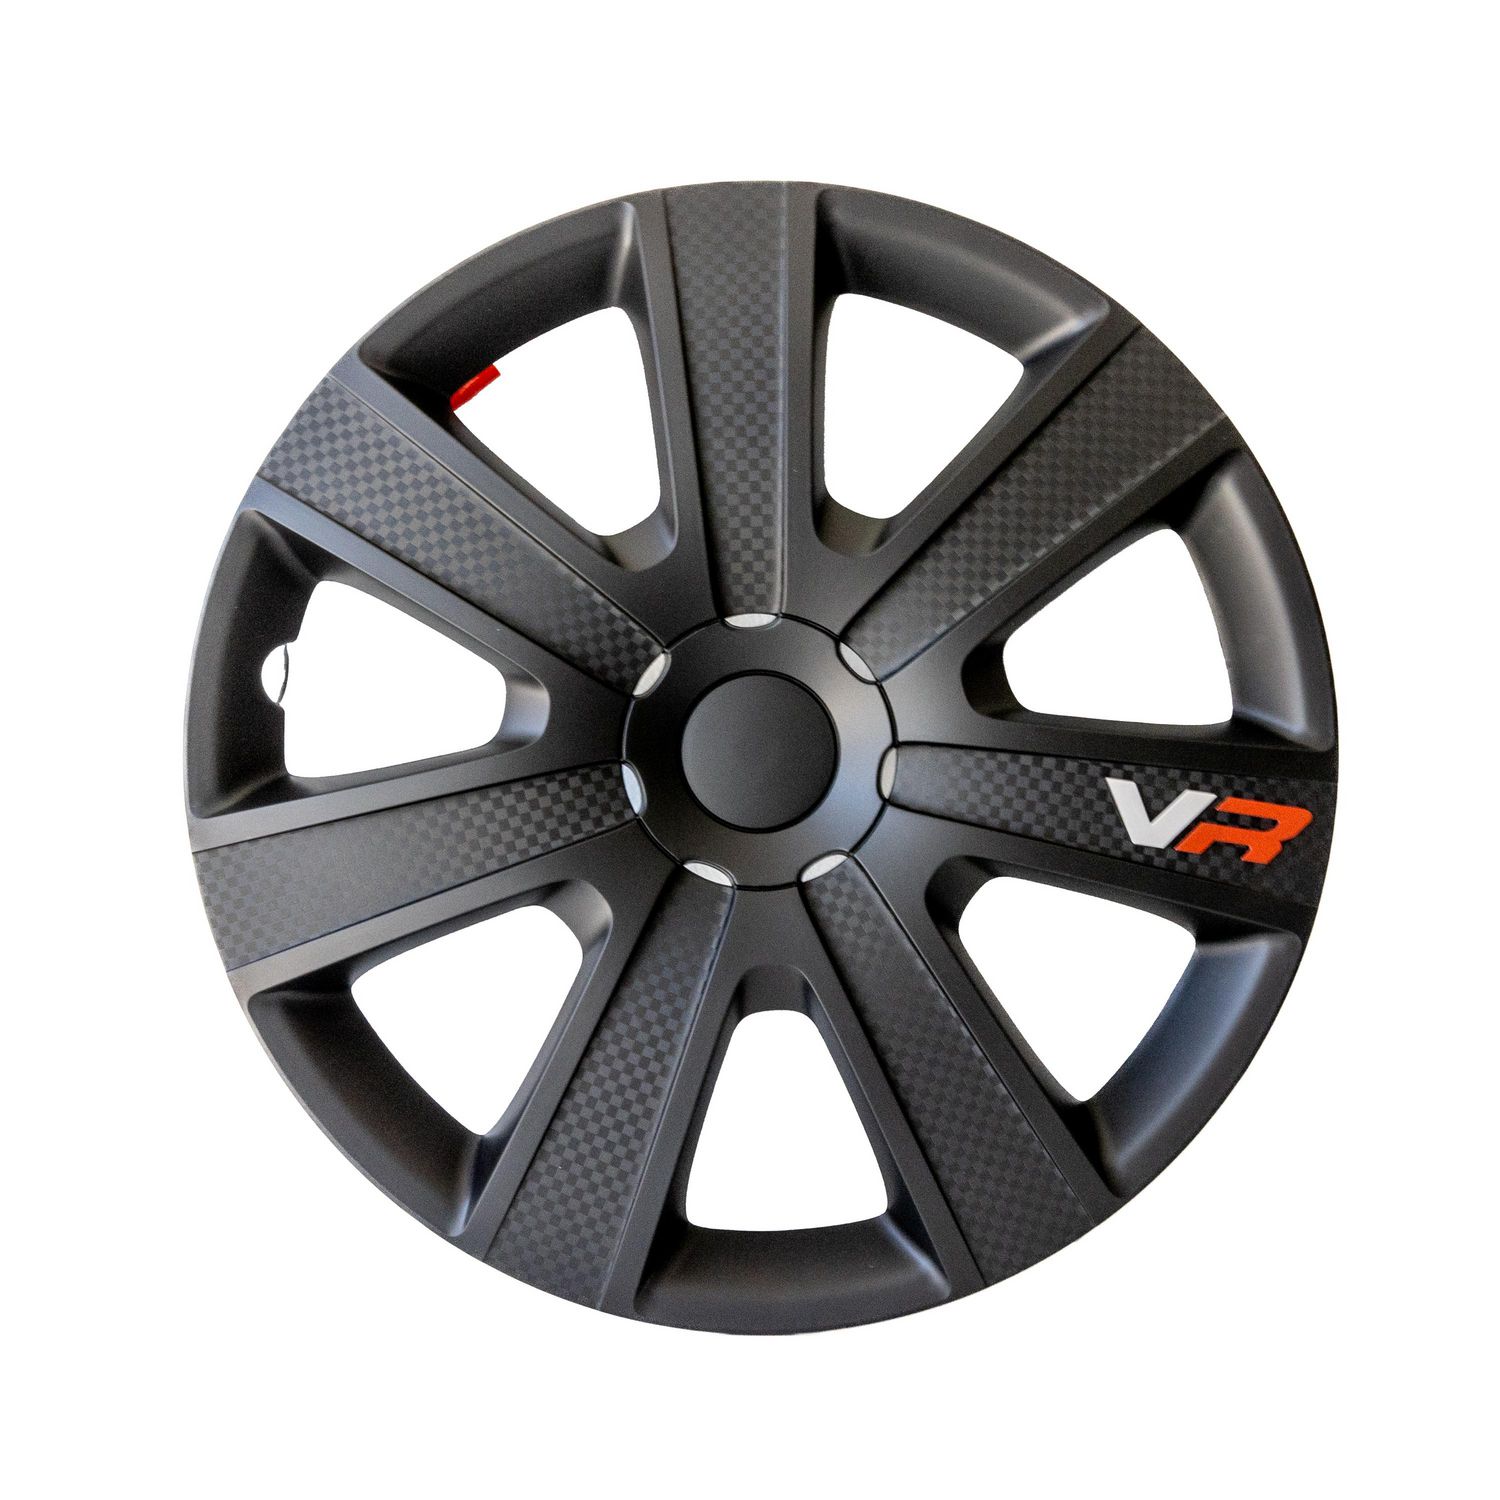 16 In VR Carbon Black Wheel Cover pack